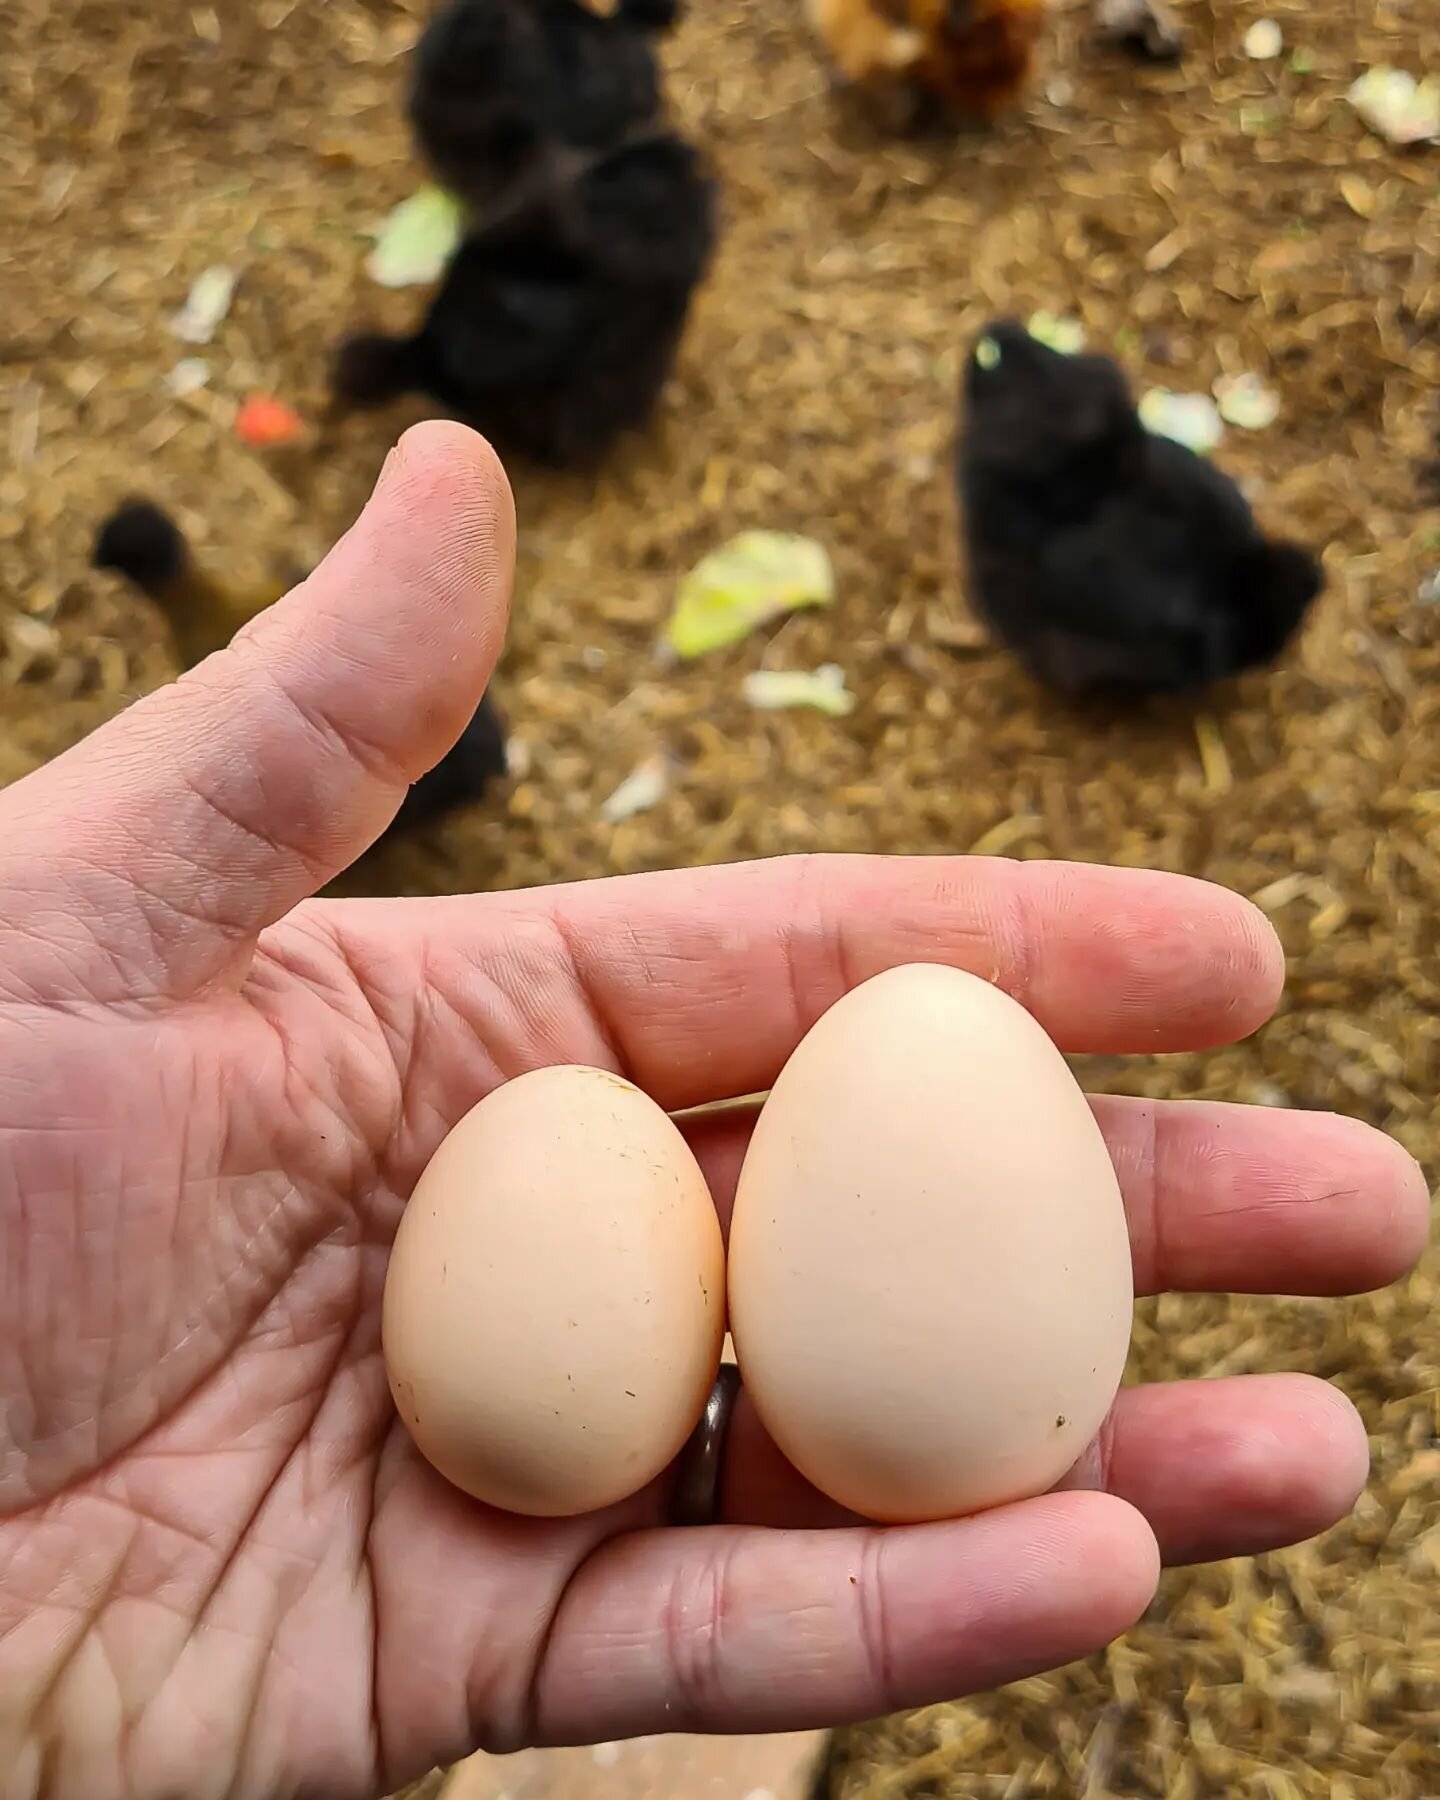 As our plans for the gardens and lavender fields take shape, it can all begin to sometimes feel insurmountable. That's why we like to stop and take notice of the small wins.

This morning, when checking on our chickens, we discover that our newest me